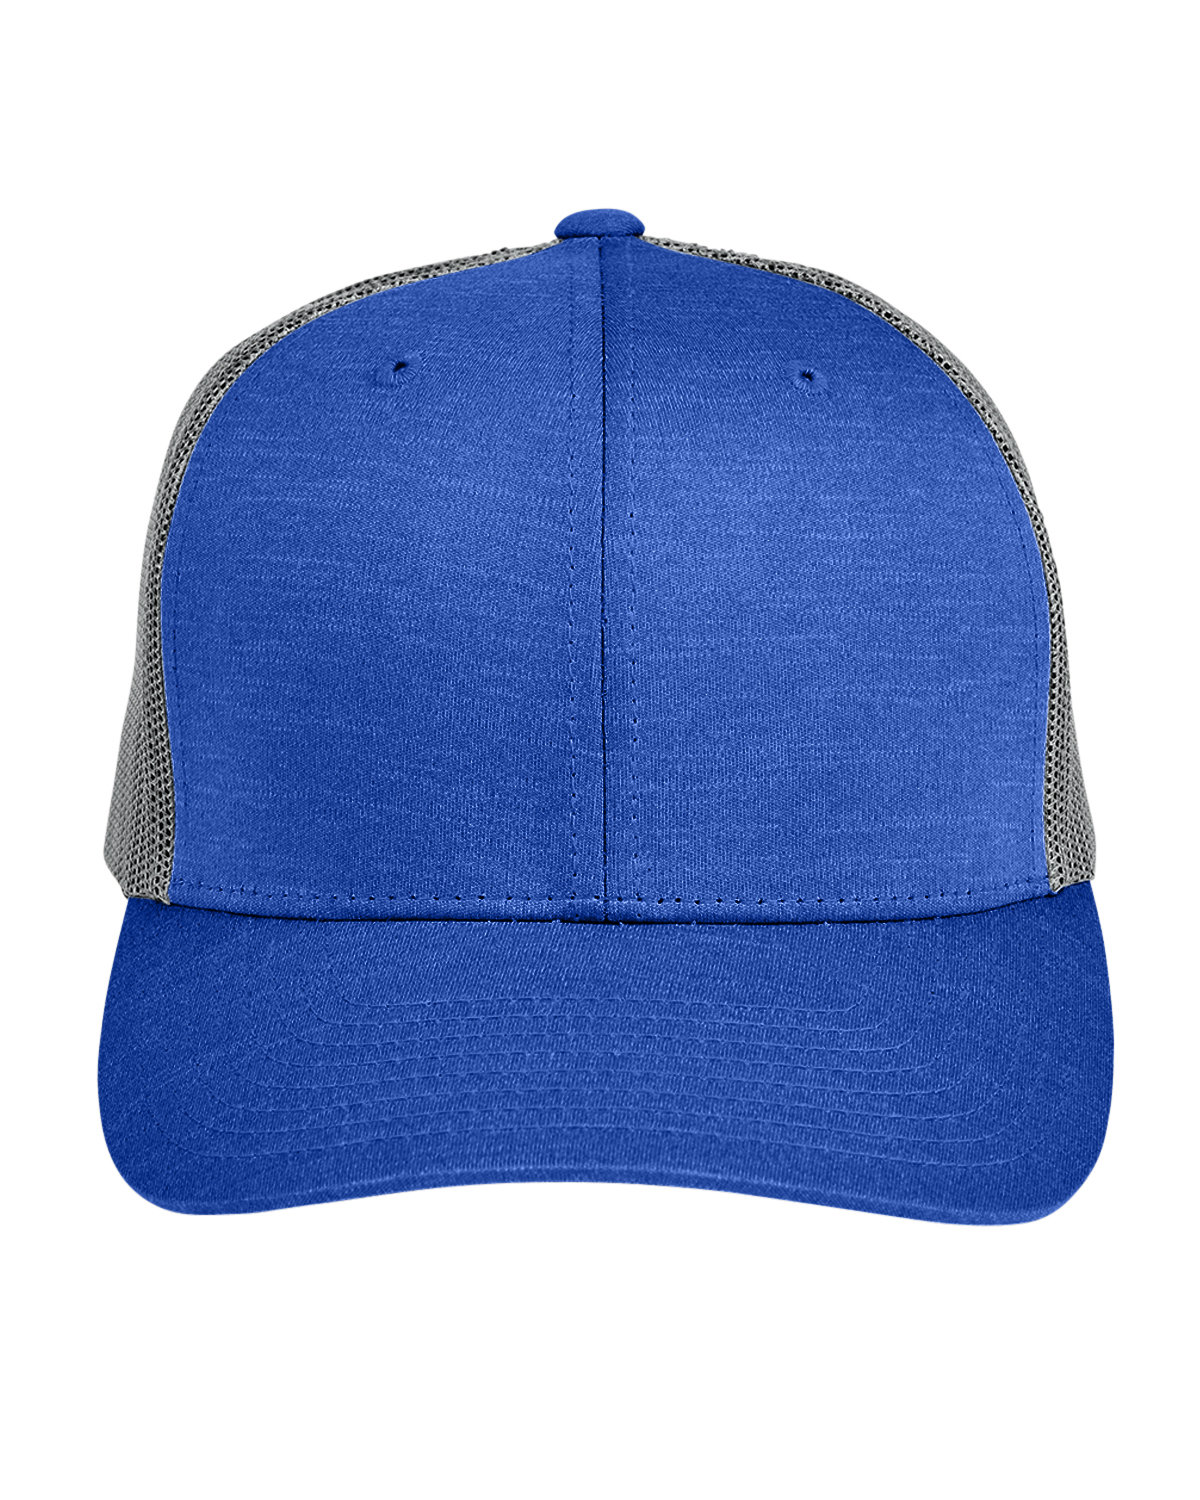 Team 365 by Yupoong® Adult Heather Sonic Cap alphabroder | Trucker Zone